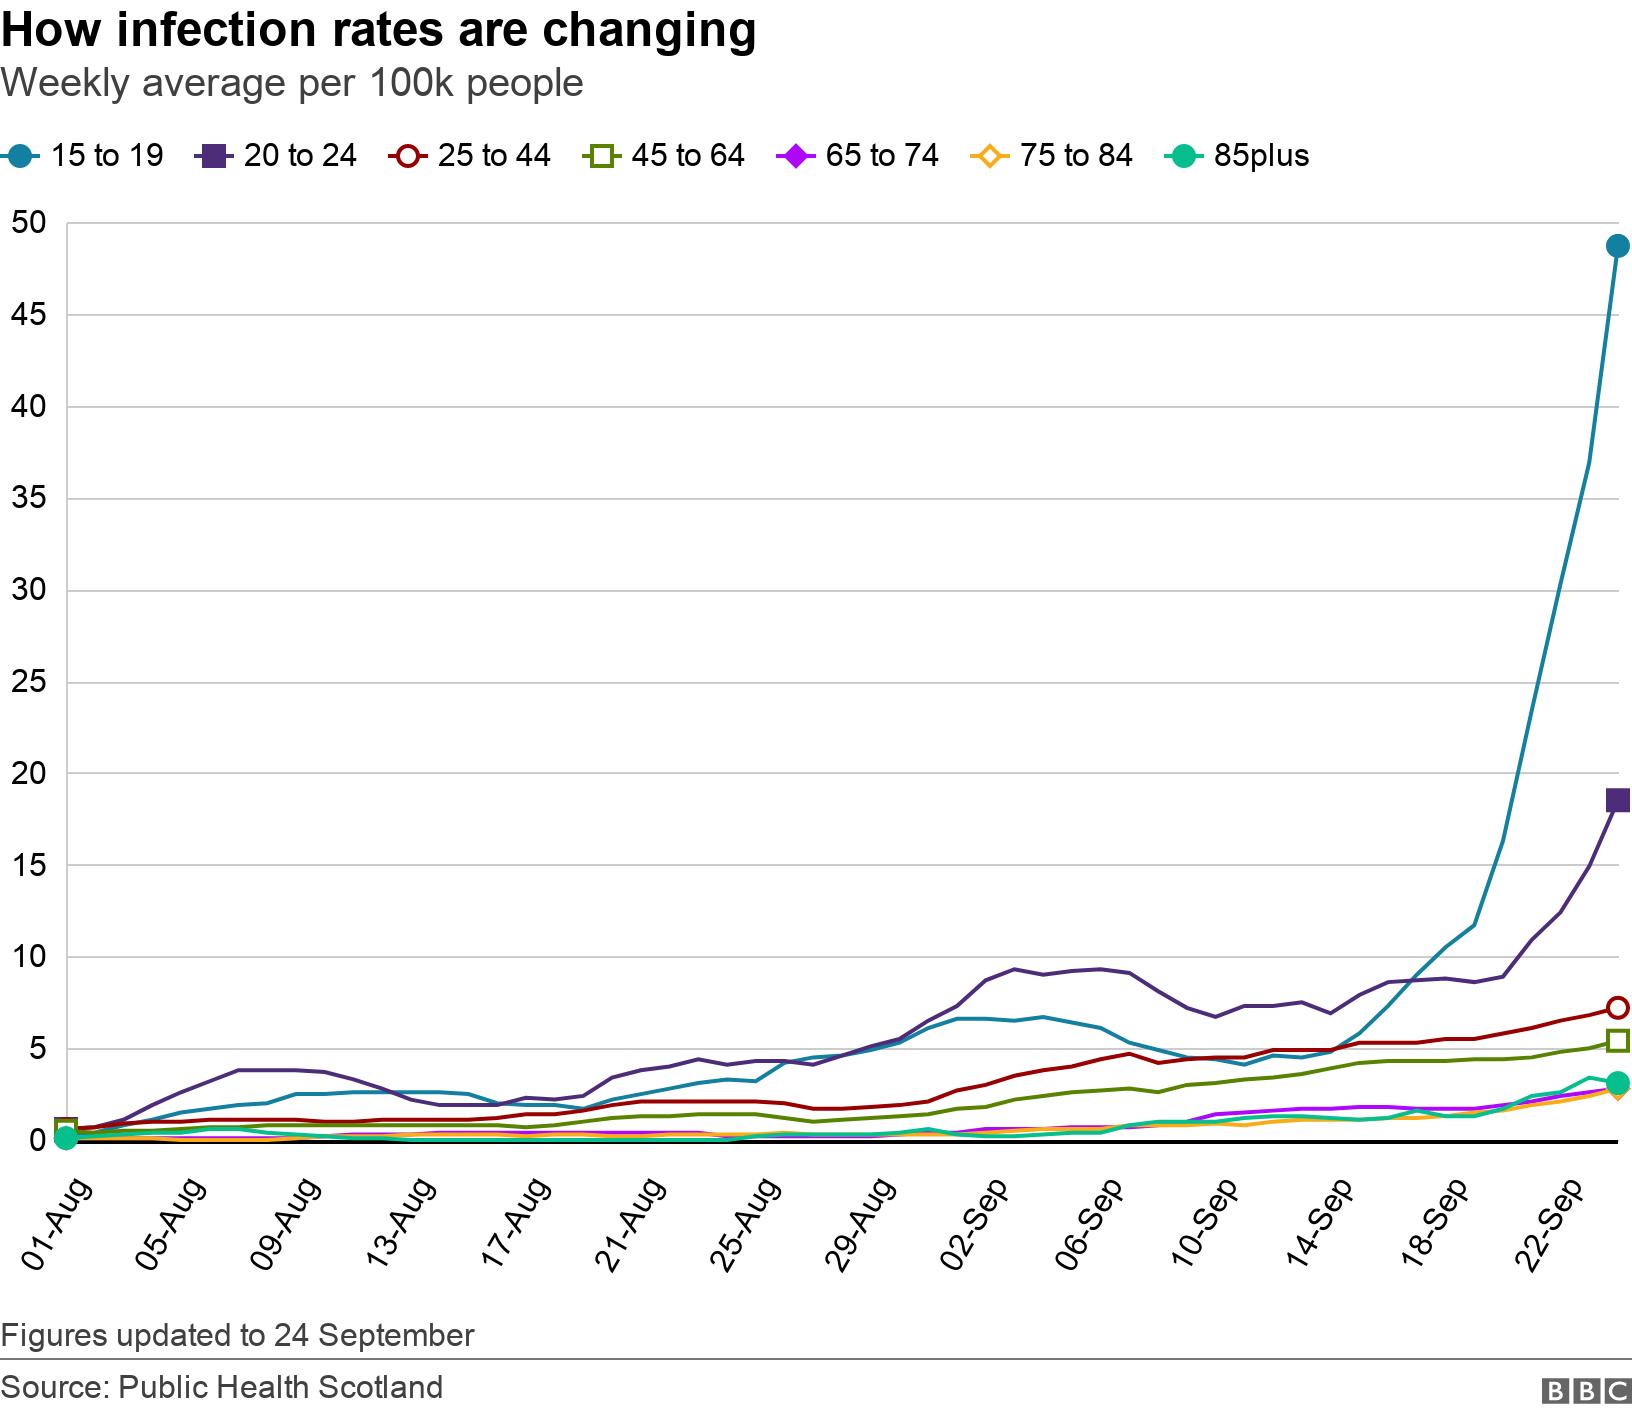 How infection rates are changing. Weekly average per 100k people.  Figures updated to 24 September.